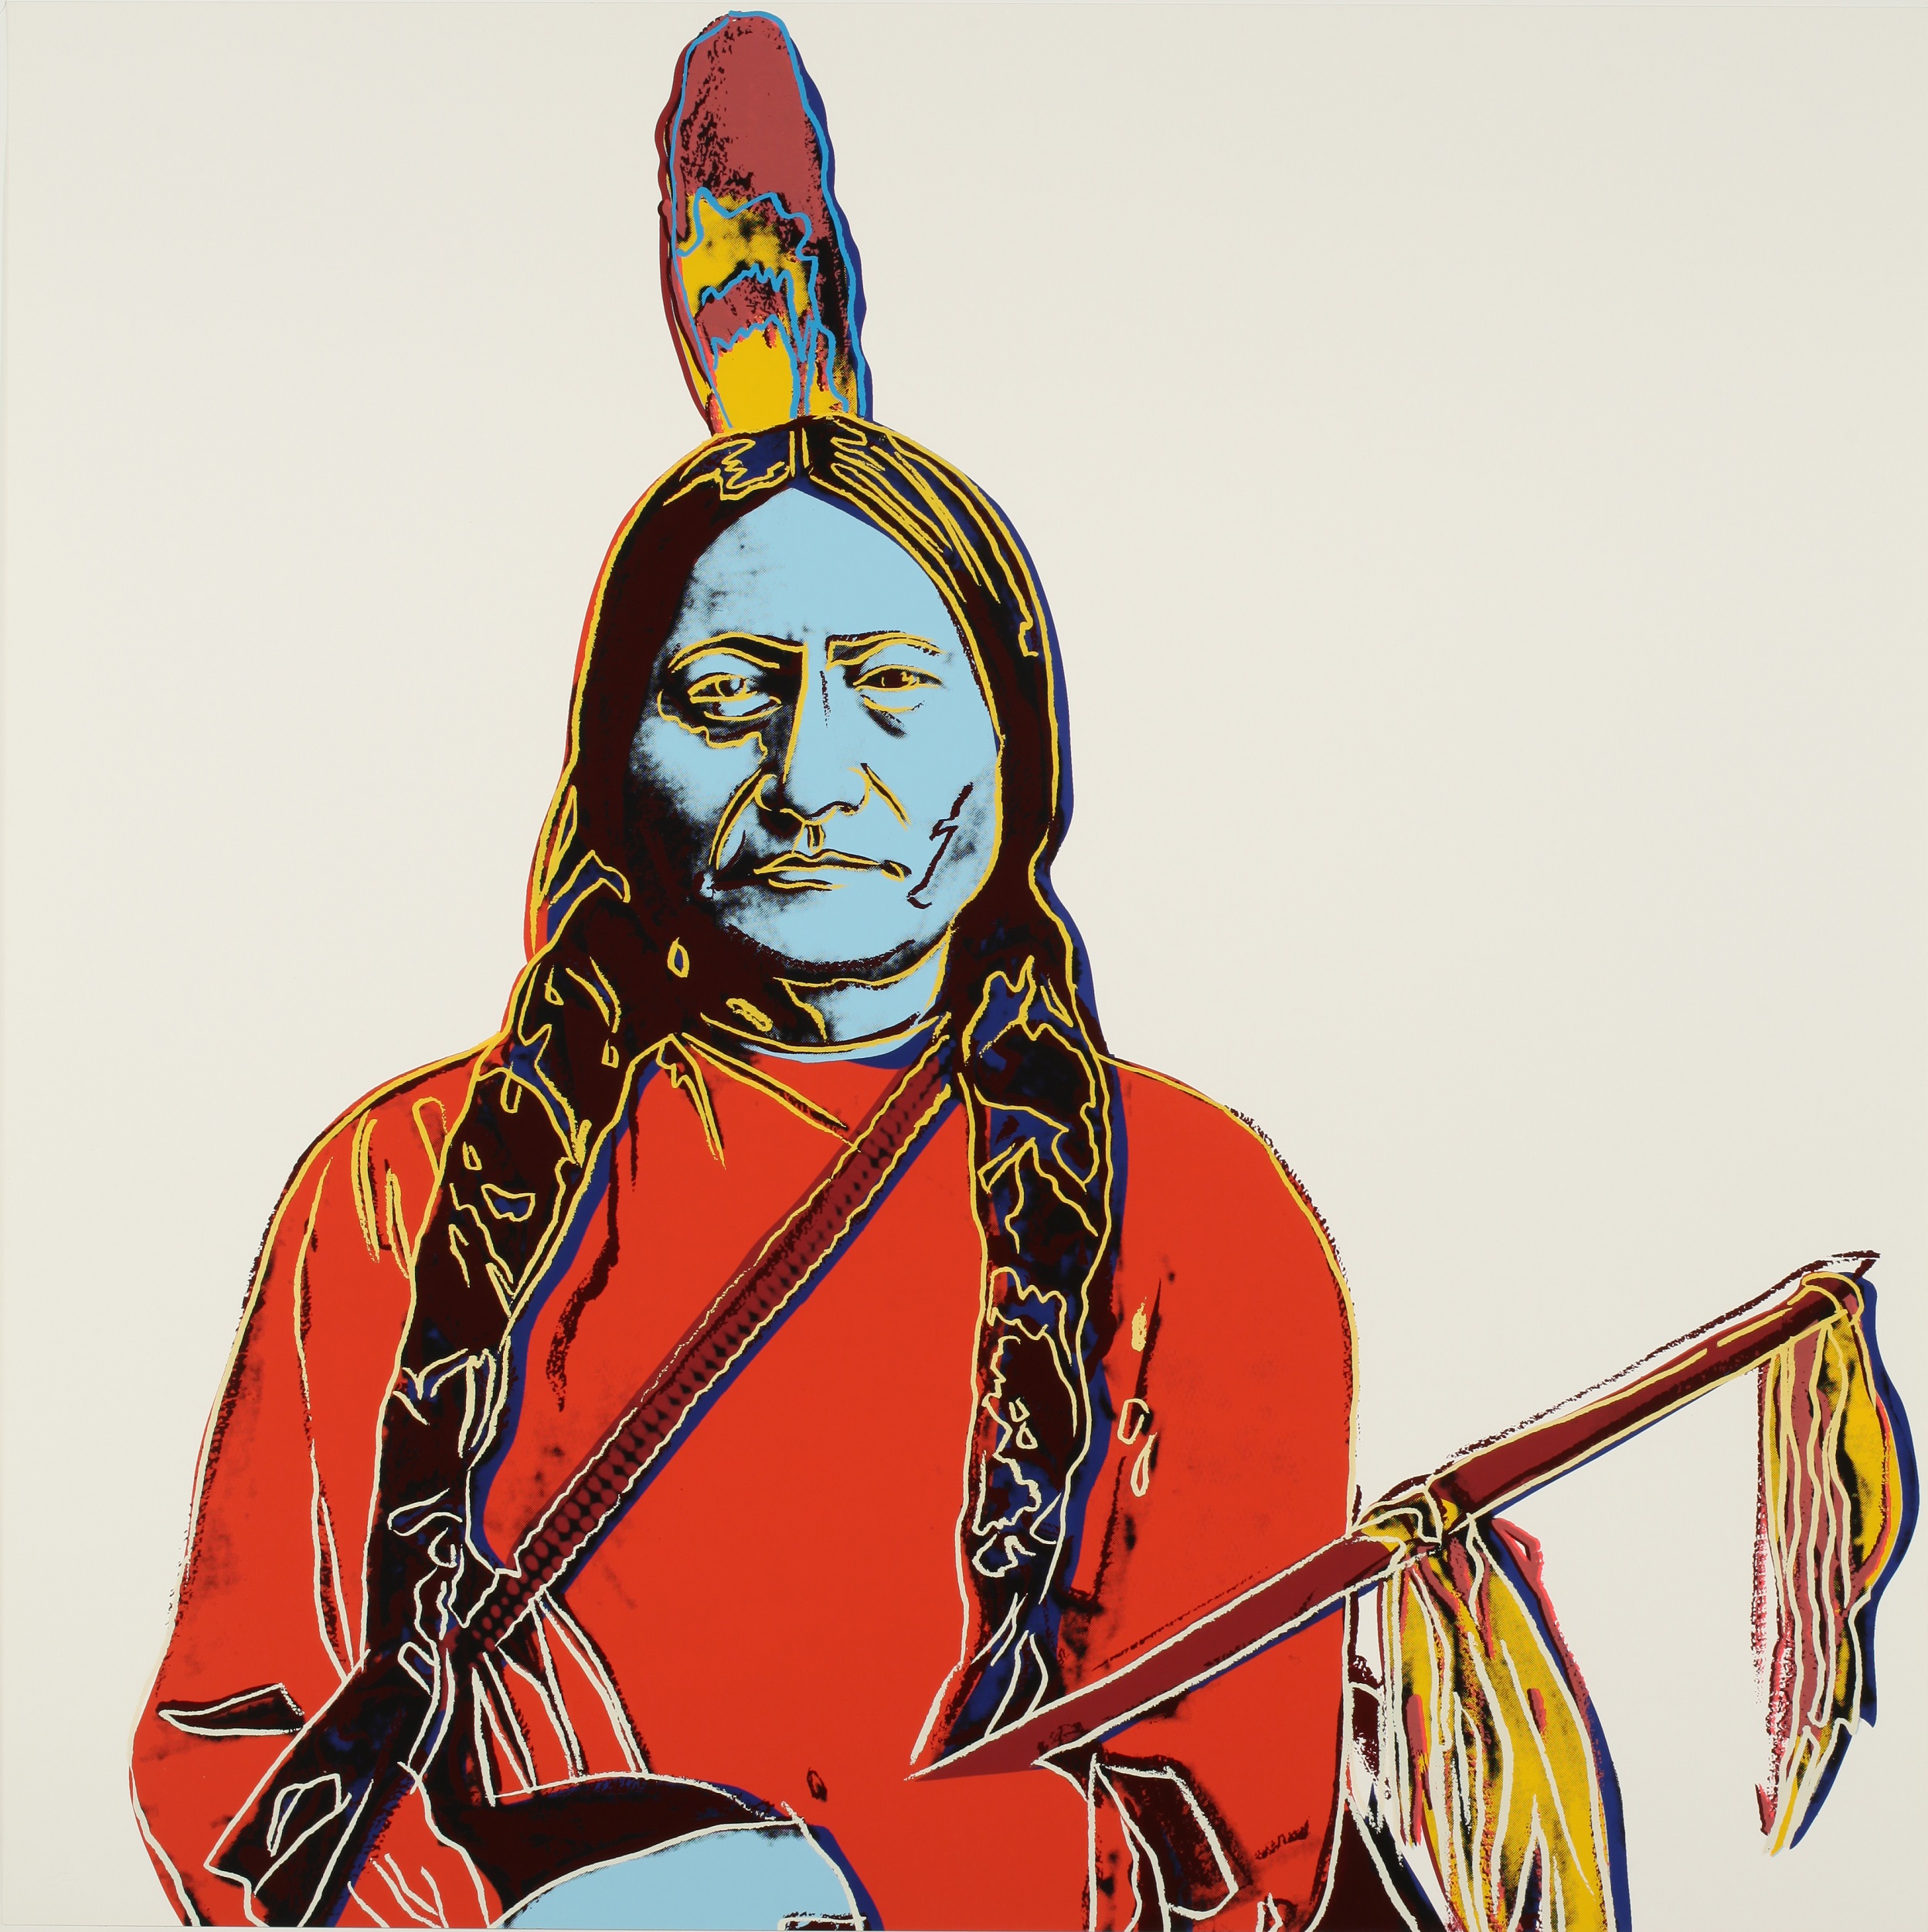 Colorful screen print of a Native American man with two long braids seen from the waist up, wearing a red tunic and a single feather on his head.